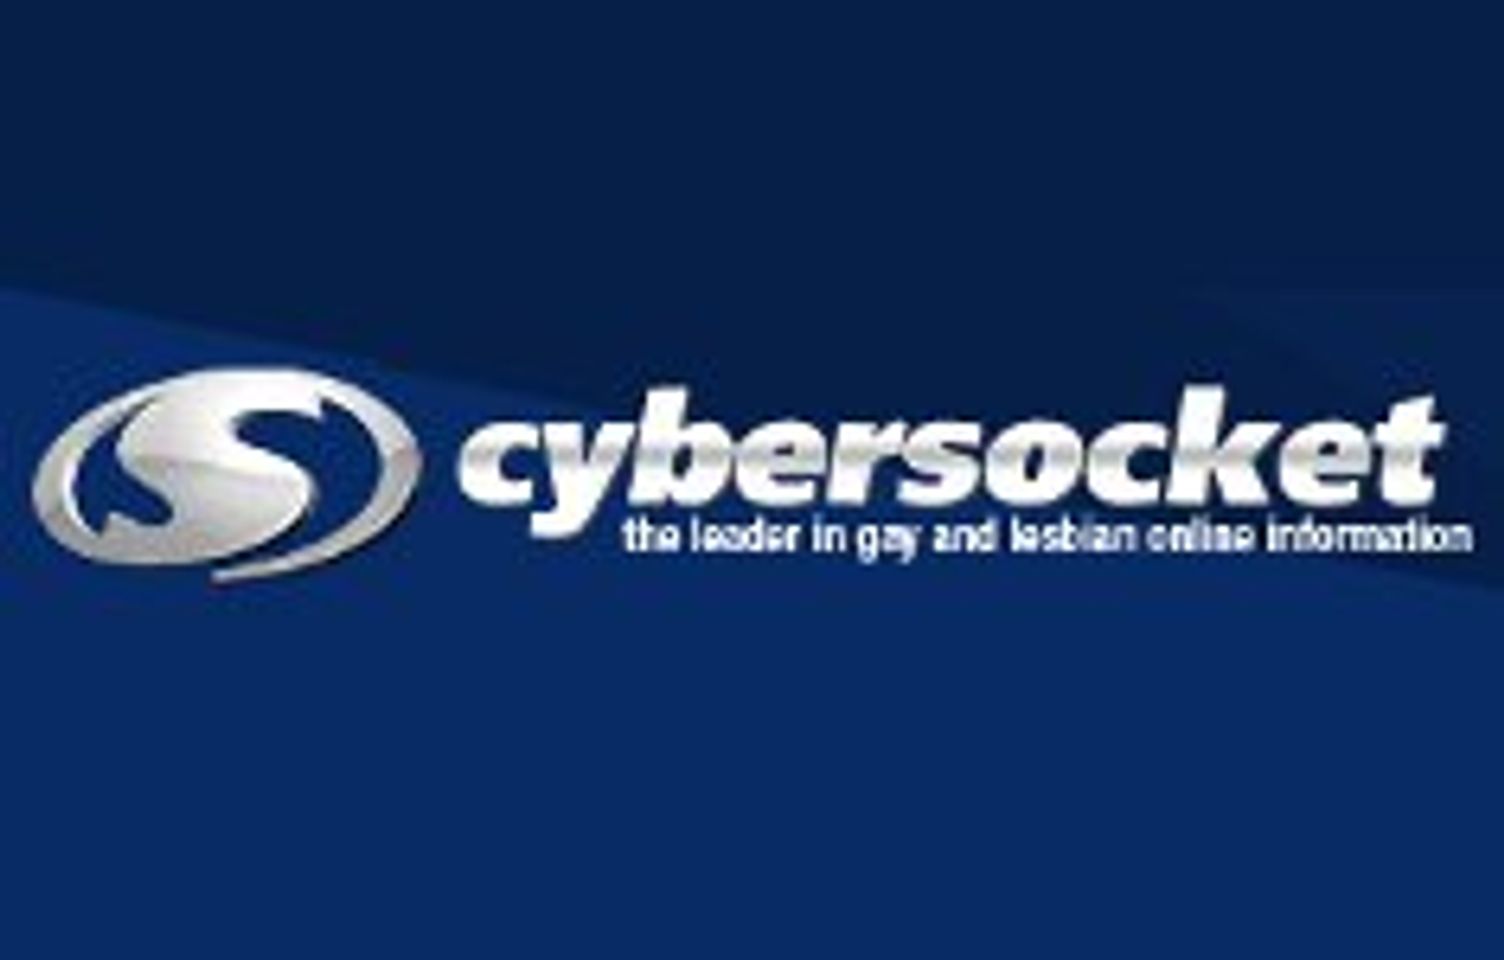 Cybersocket to Host Booth, Party, Dinner During LA PRIDE